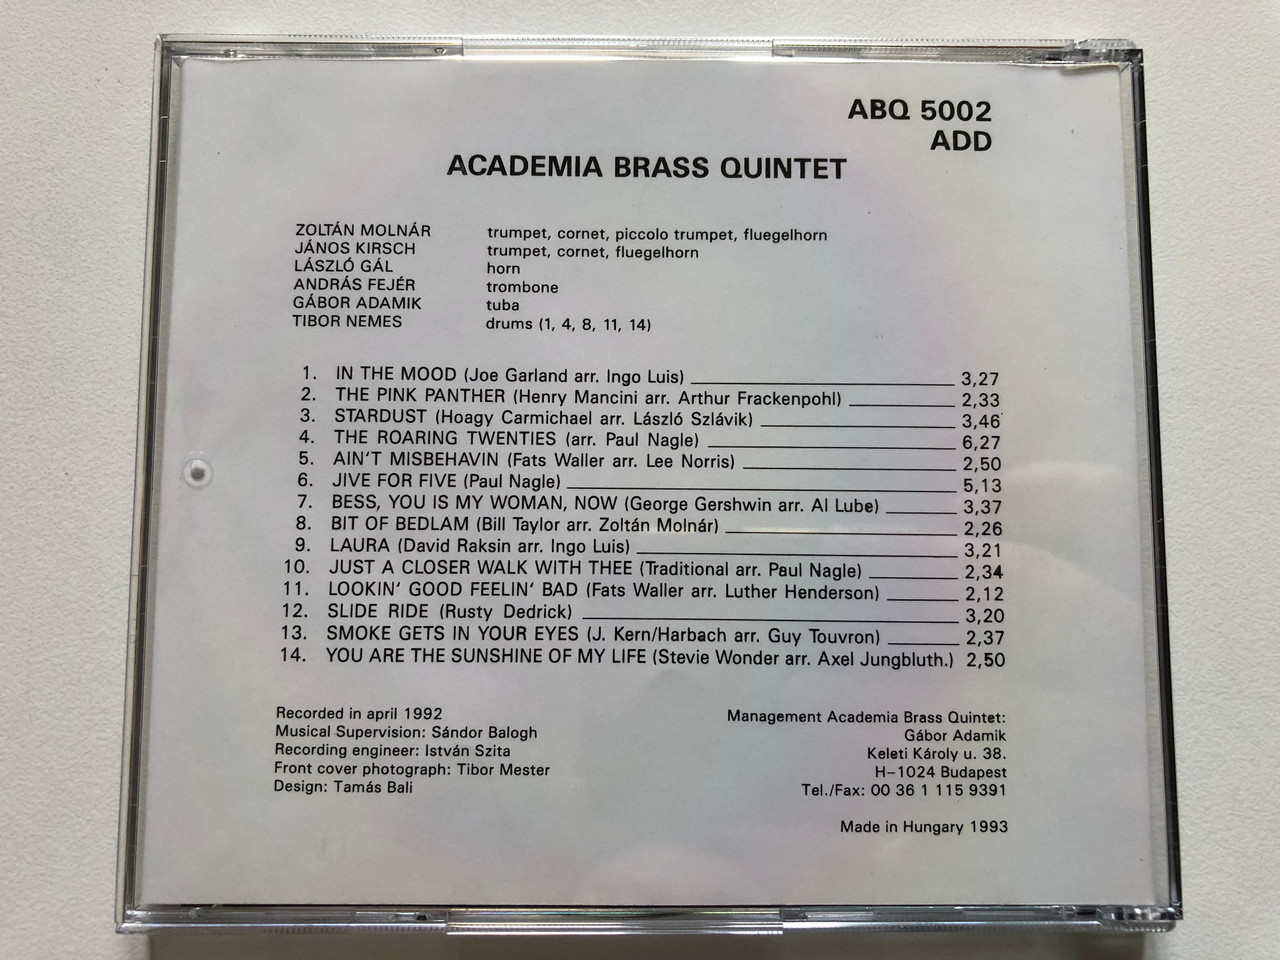 https://cdn10.bigcommerce.com/s-62bdpkt7pb/products/0/images/307999/Academia_Brass_Quintet_In_The_Mood_Audio_CD_1993_ABQ_5002_5__93220.1698918454.1280.1280.JPG?c=2